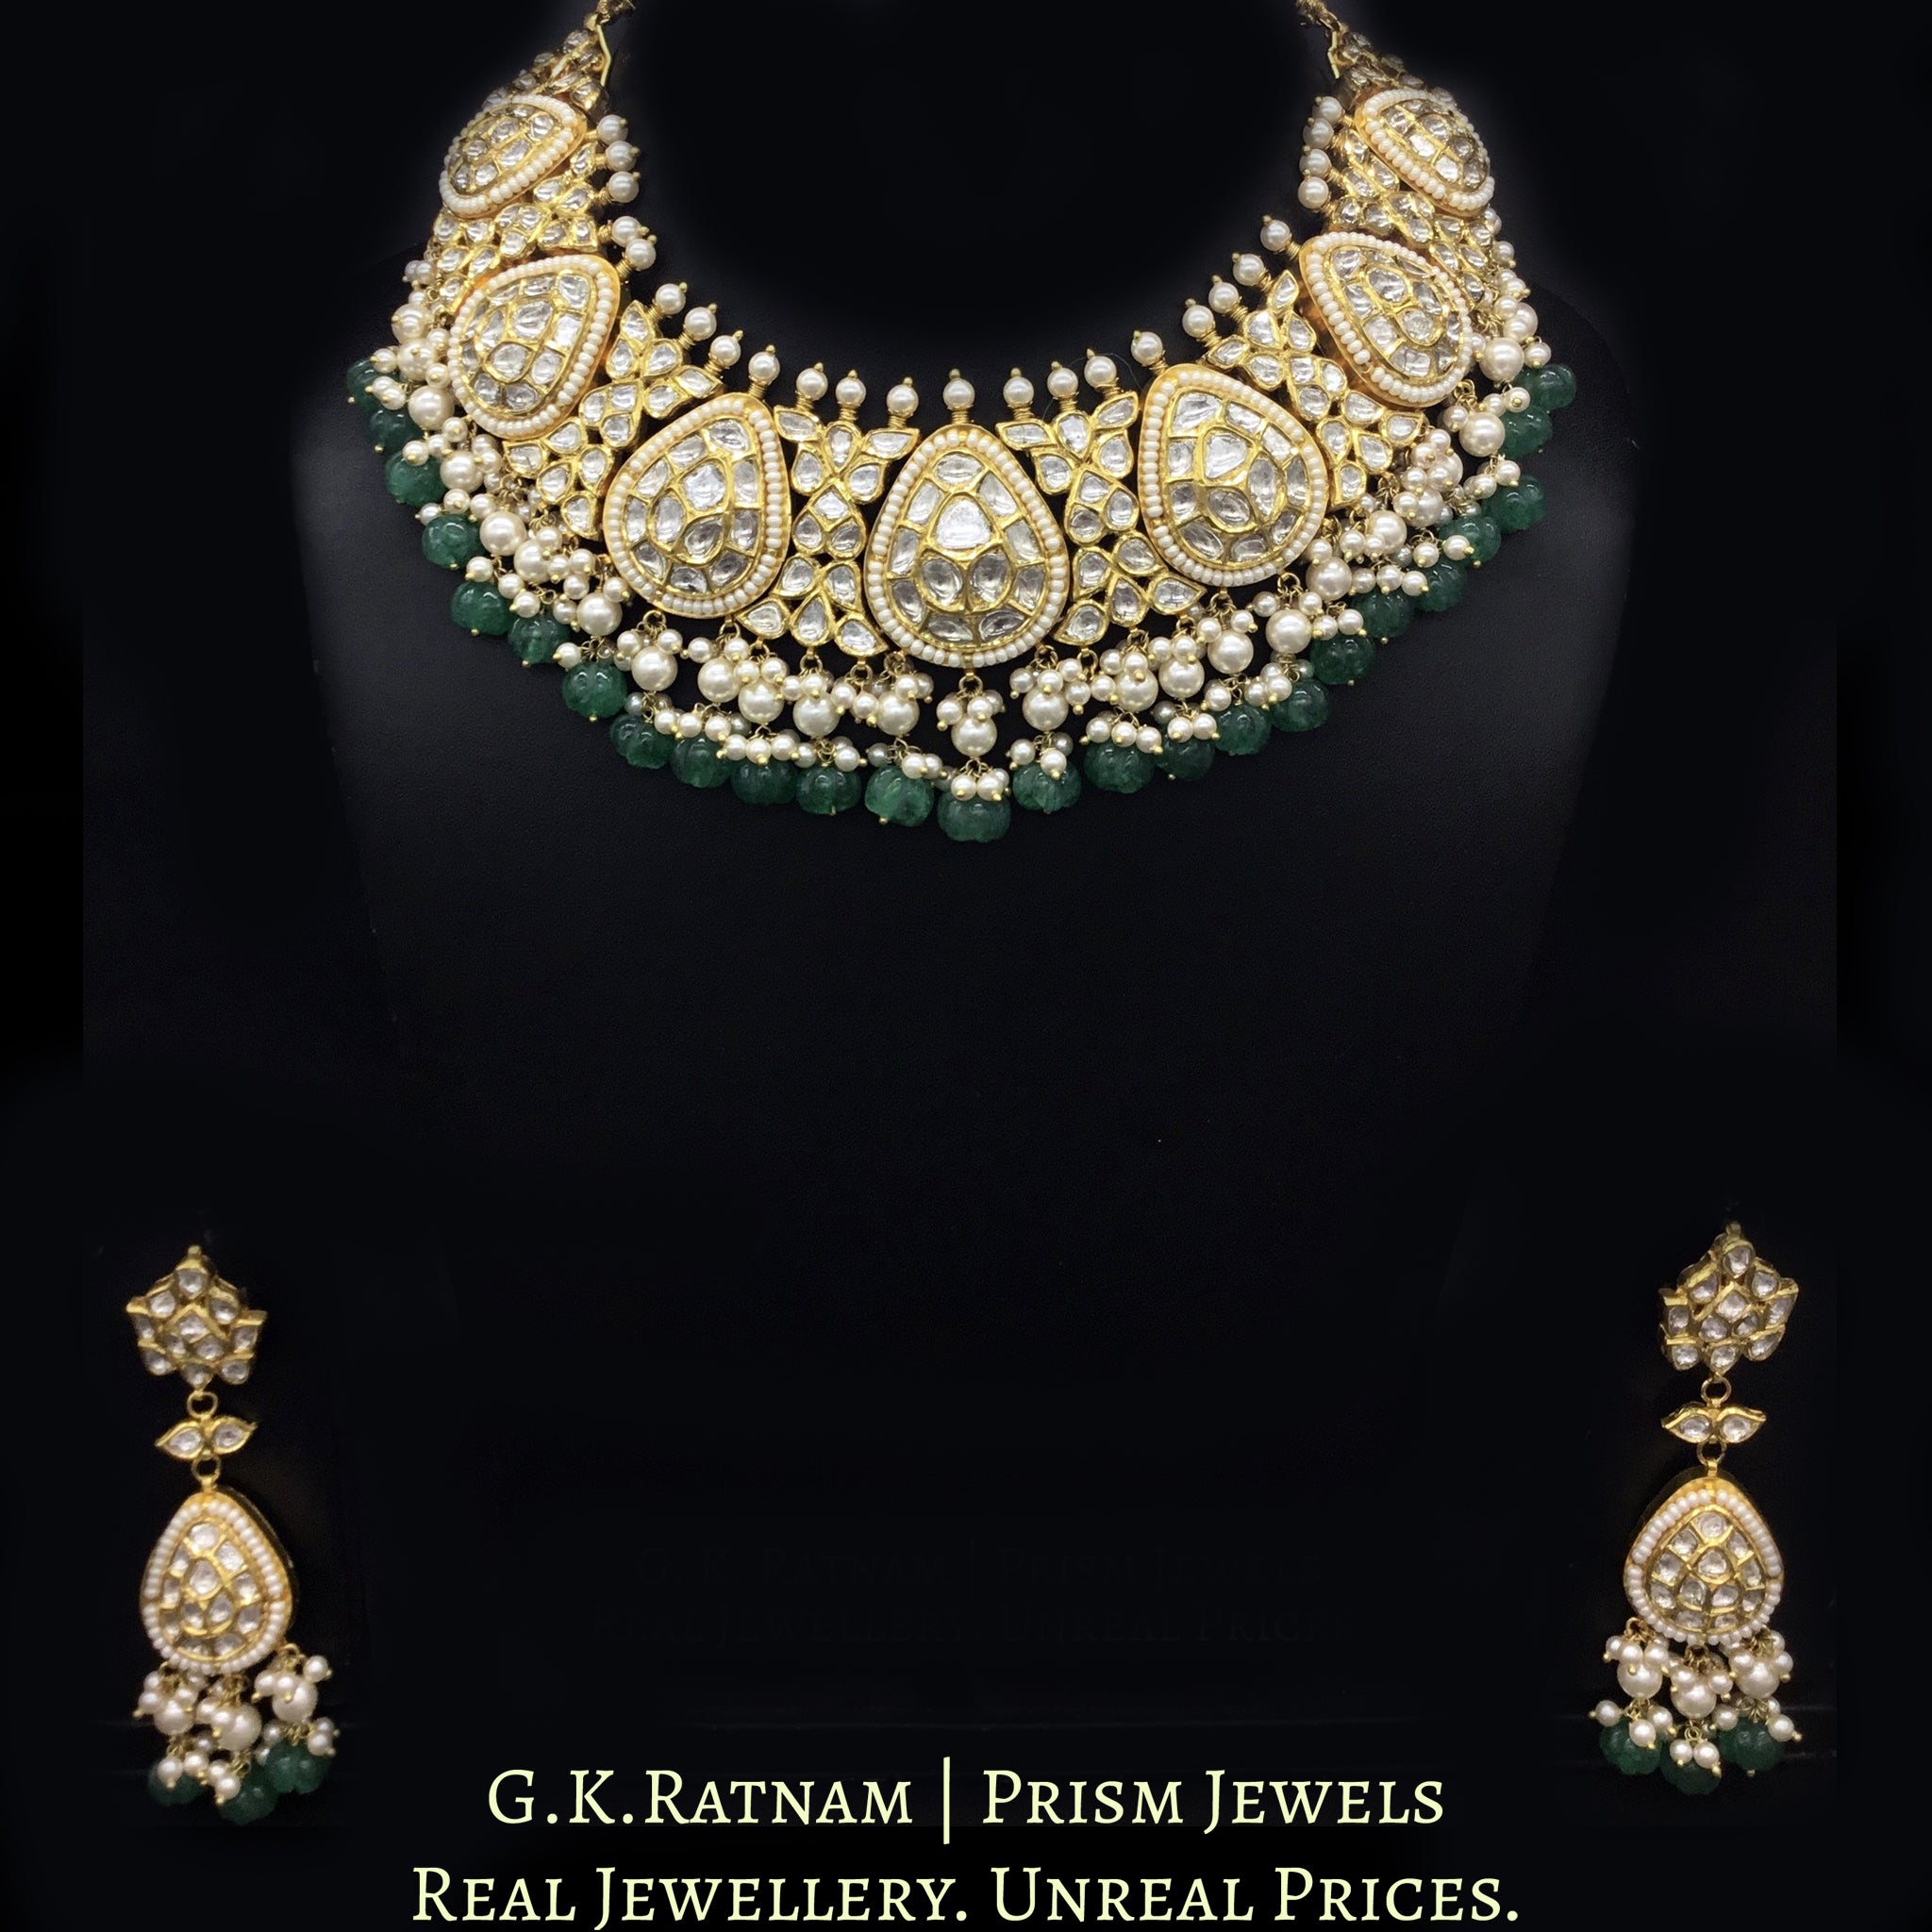 18k Gold and Diamond Polki Necklace Set With Pearls and emerald-green Carved Melons